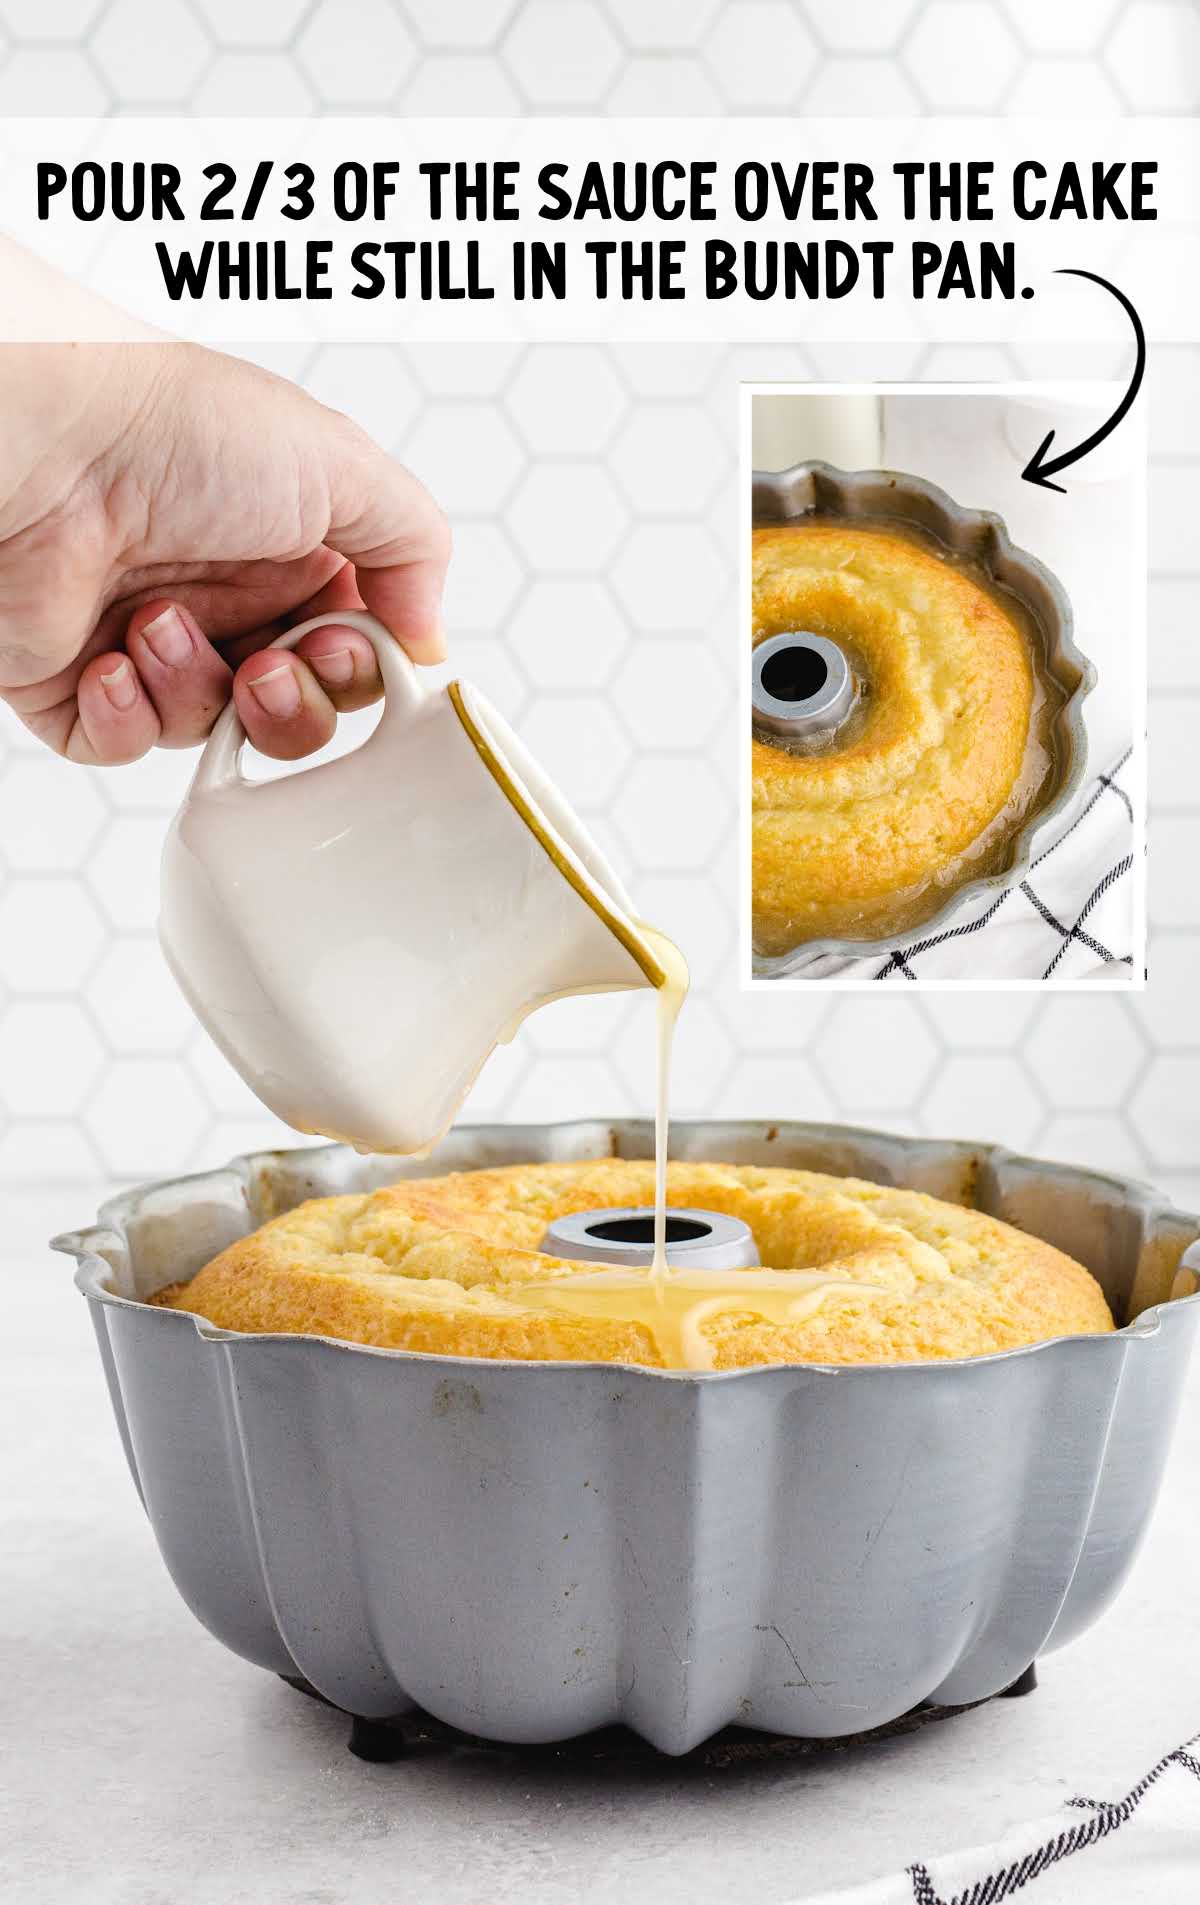 sauce being poured on top of baked cake